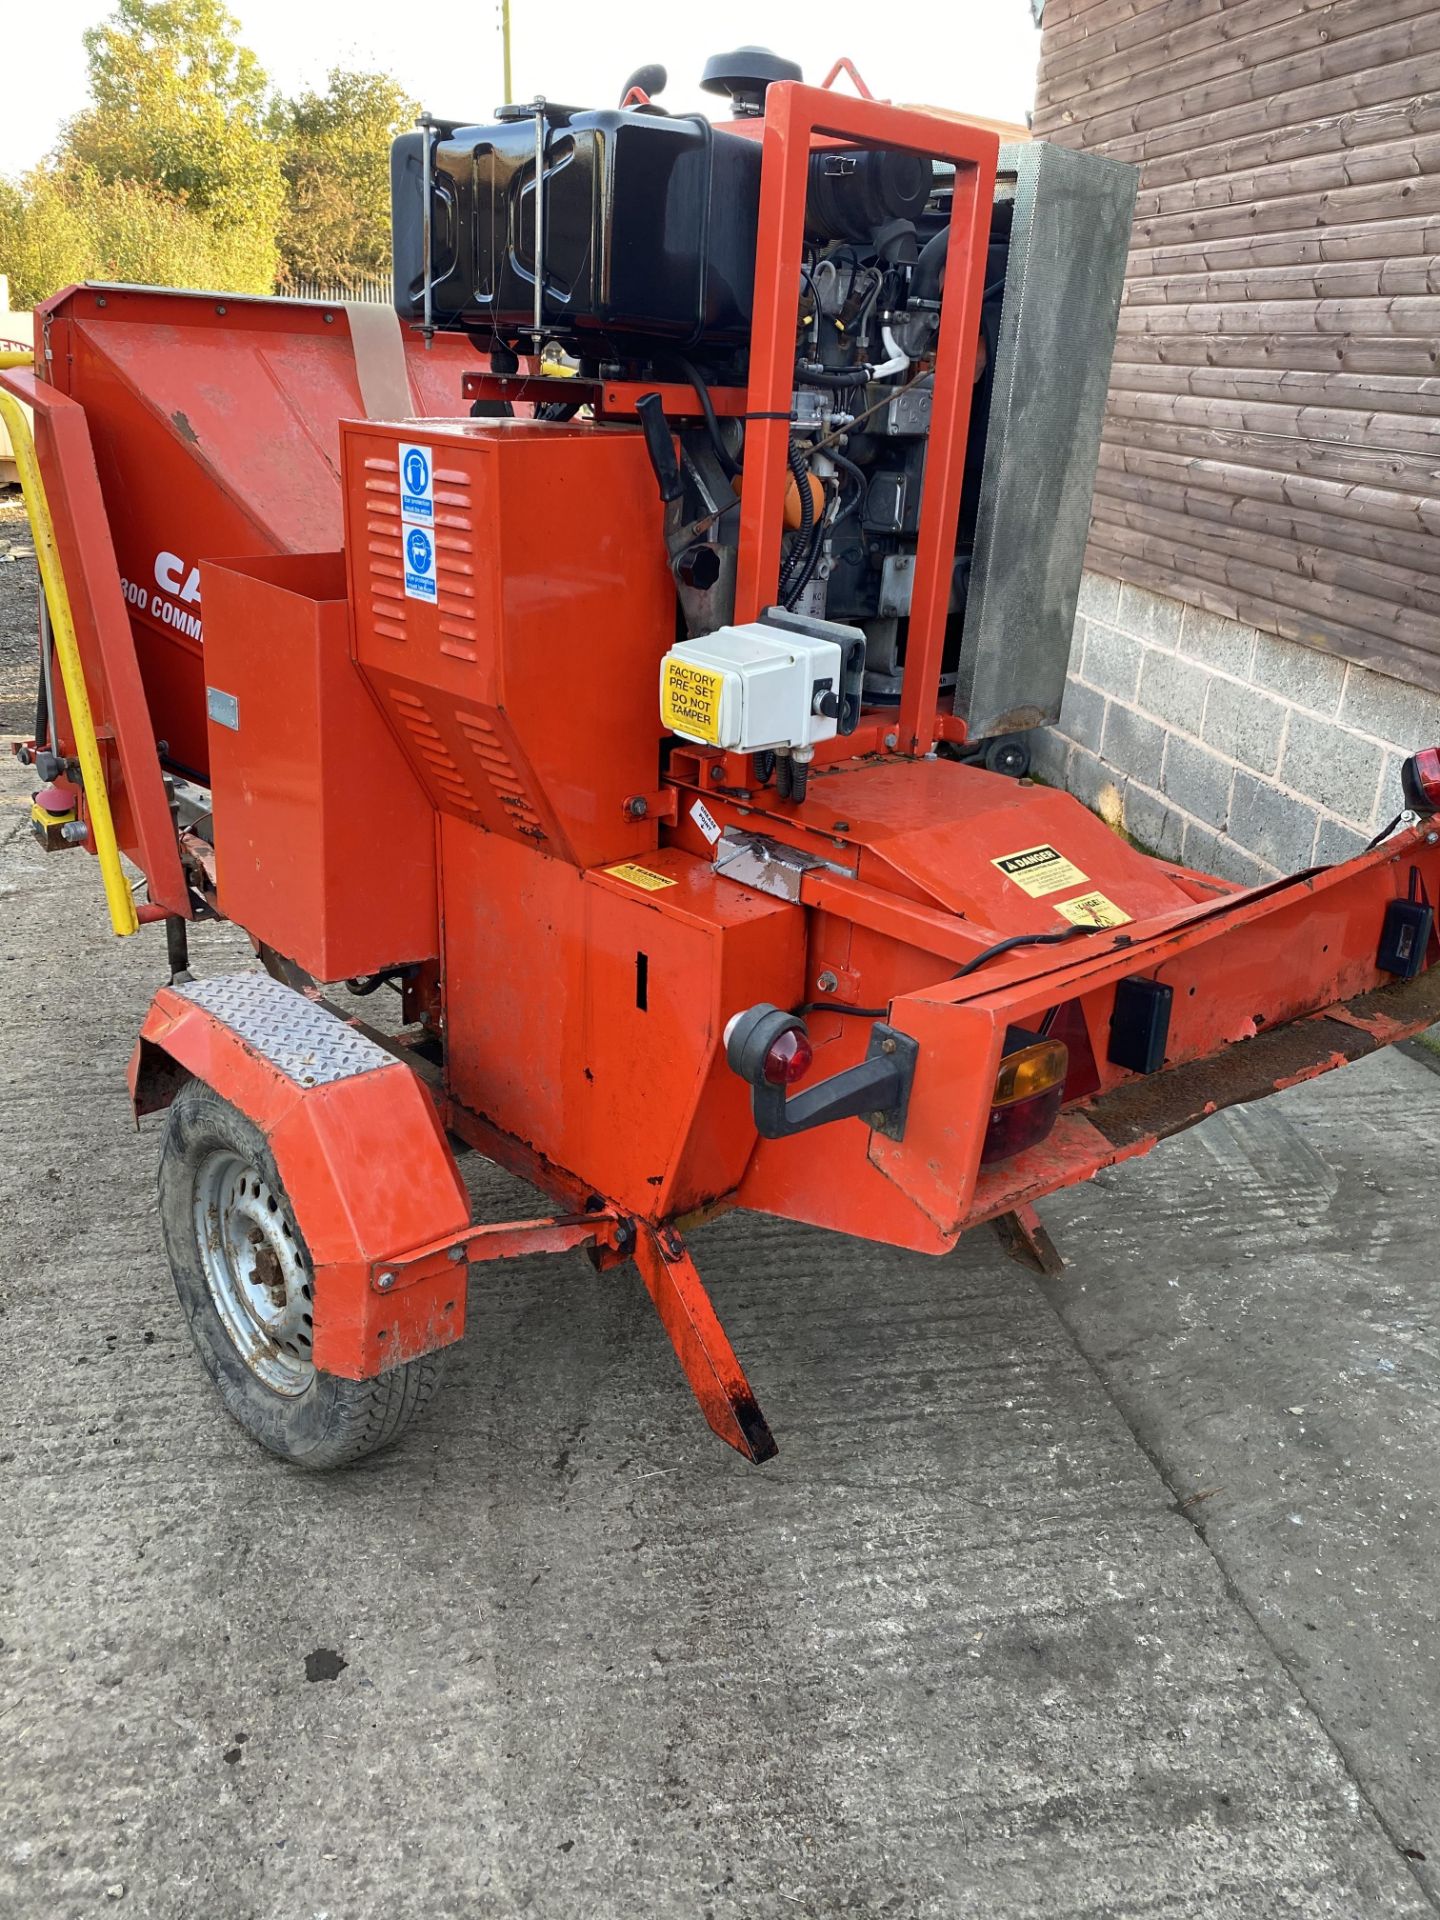 CAMON C300 TOWABLE DIESEL WOOD CHIPPER, DIRECT EX COUNCIL, ONLY 238 HOURS, HYDRAULIC ROLLER FEED - Image 3 of 3